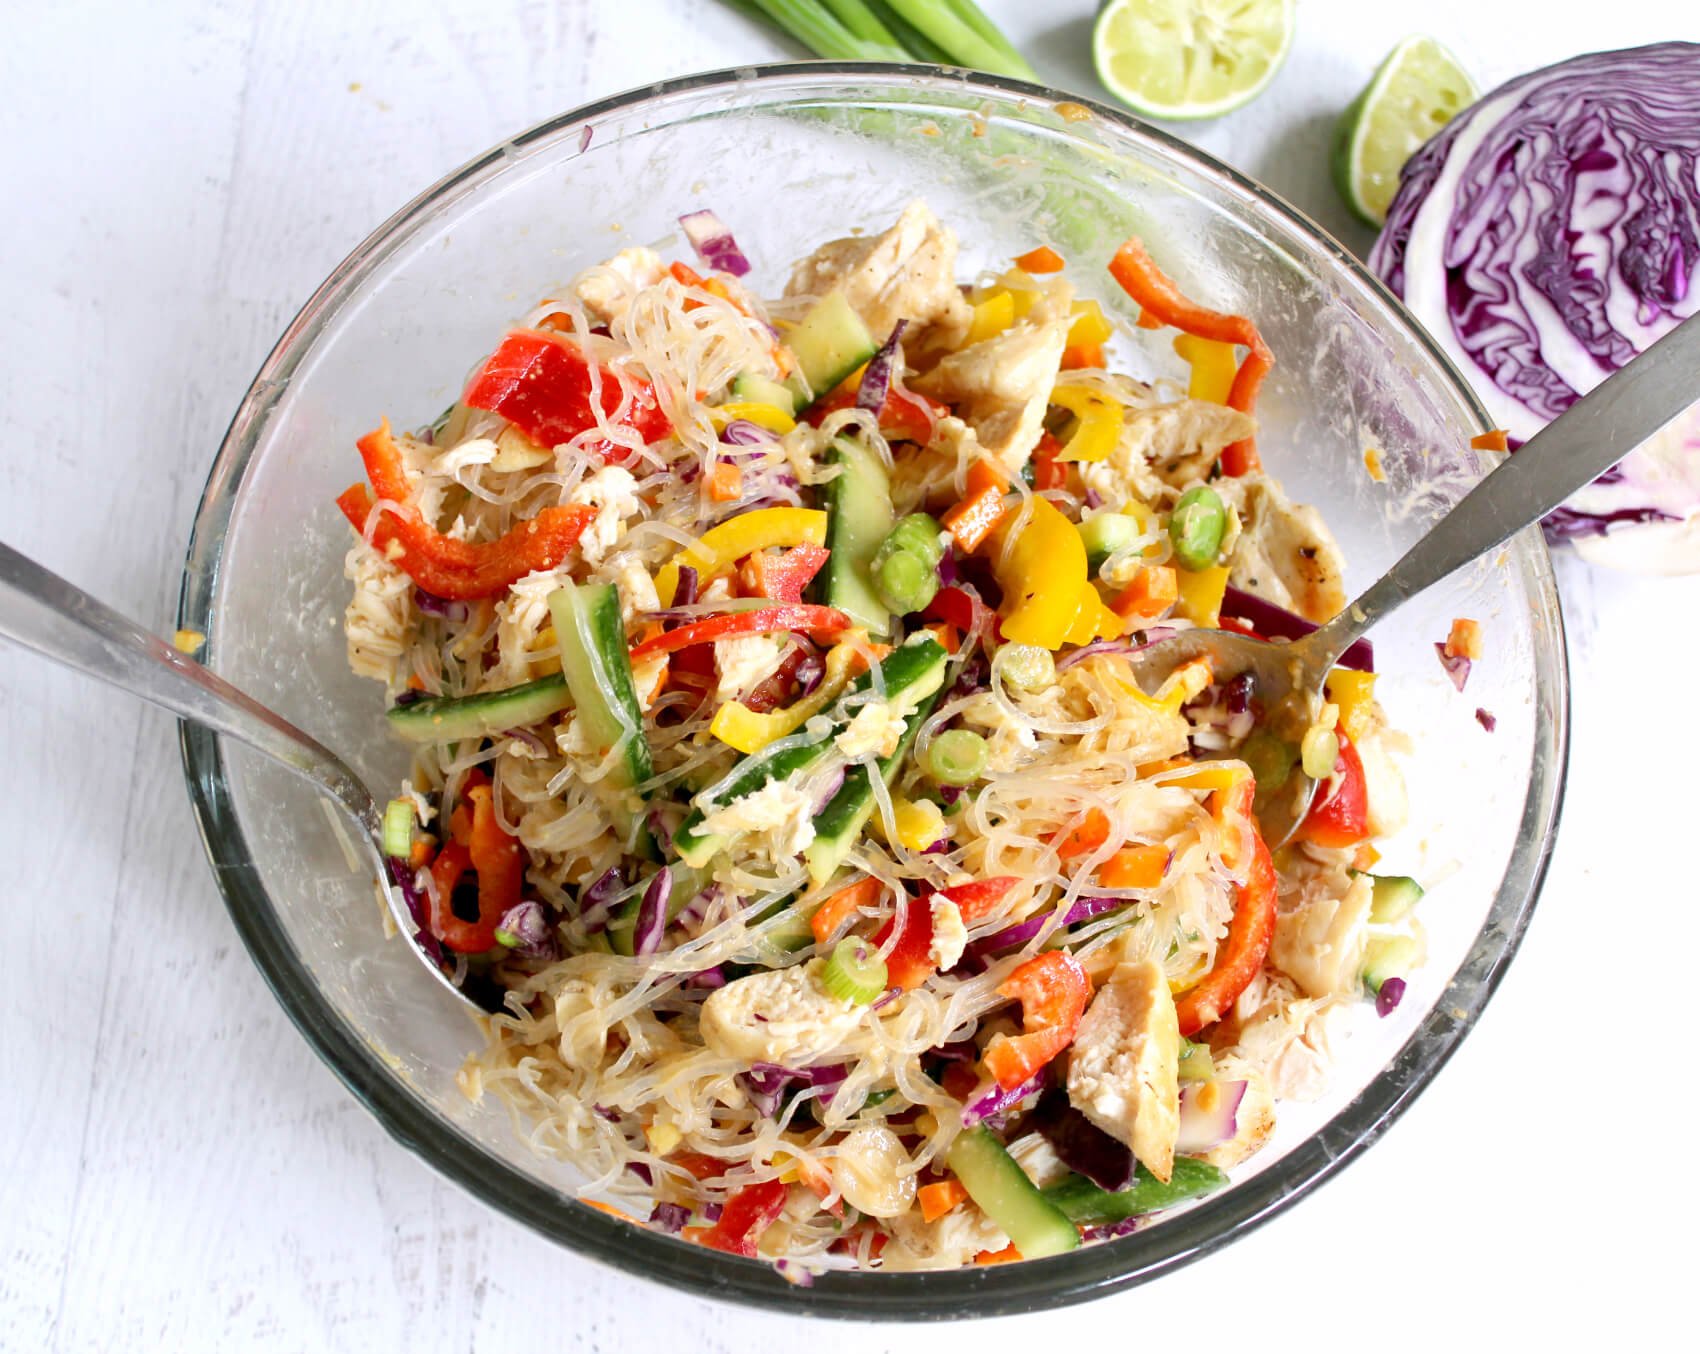 Grain-Free Confetti Chicken Noodle Salad with Lime-Almond Dressing